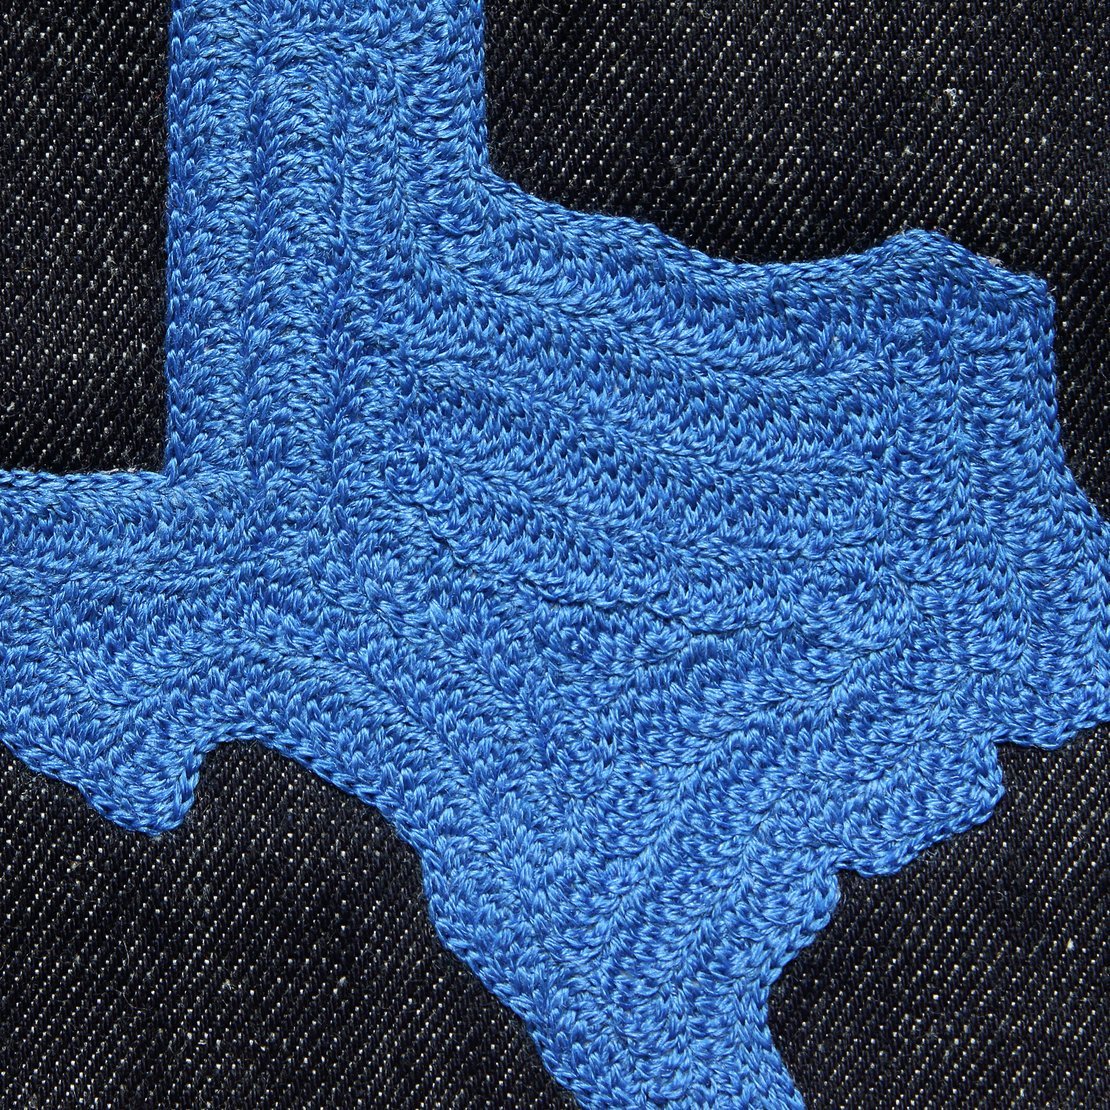 Small Direct Stitch Embroidery - State of Texas